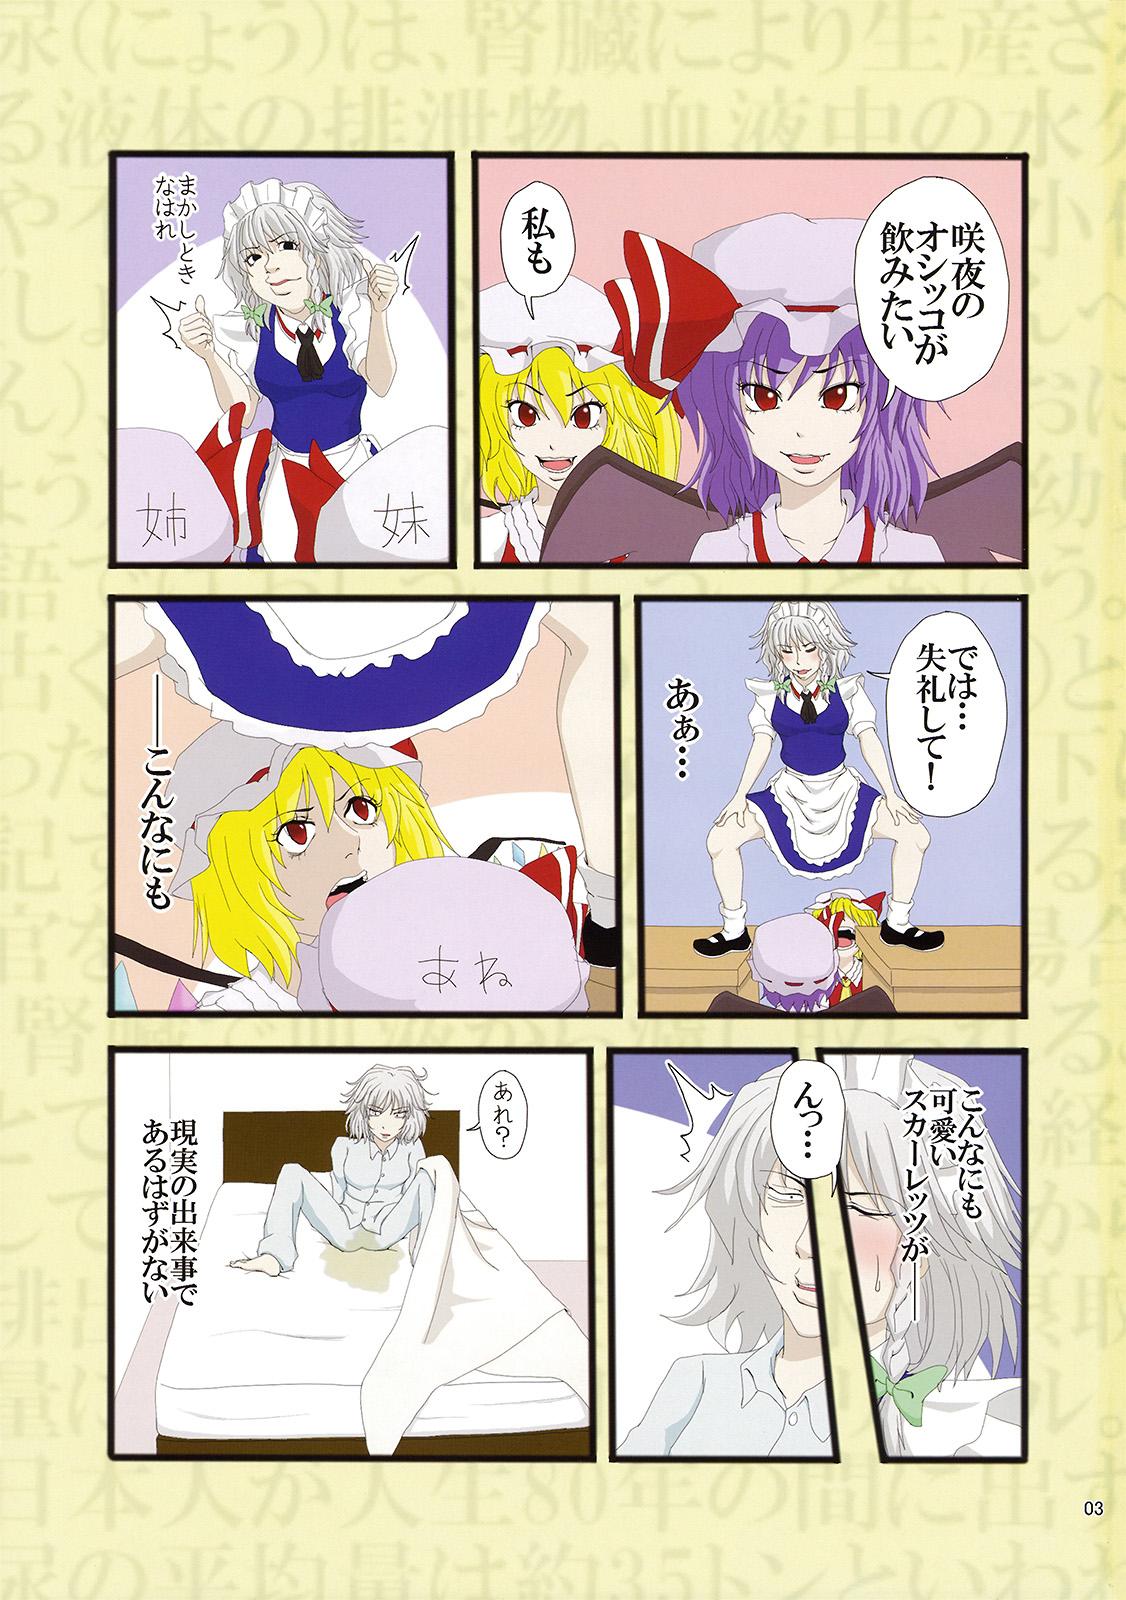 Foot Worship 完全で瀟洒な尿者 - Touhou project Hot Pussy - Page 3